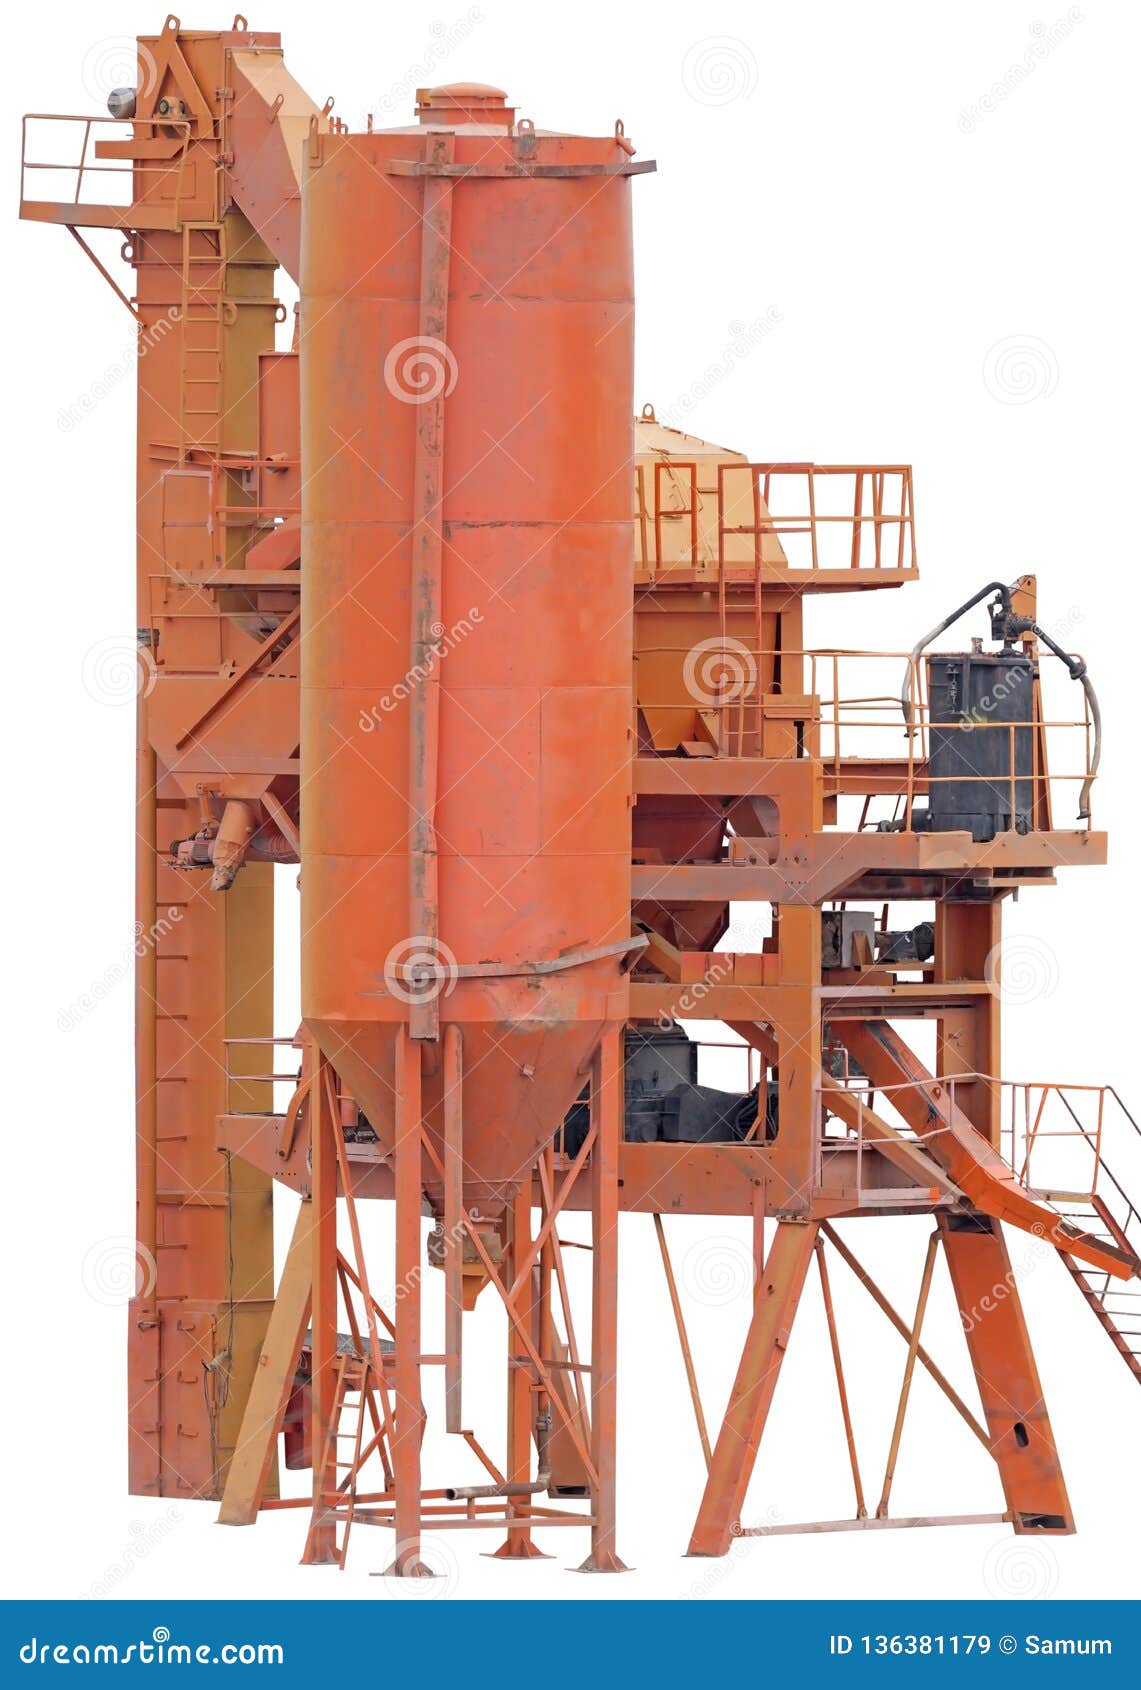 Part of Small New Concrete Mixing Plants on White Stock Image - Image